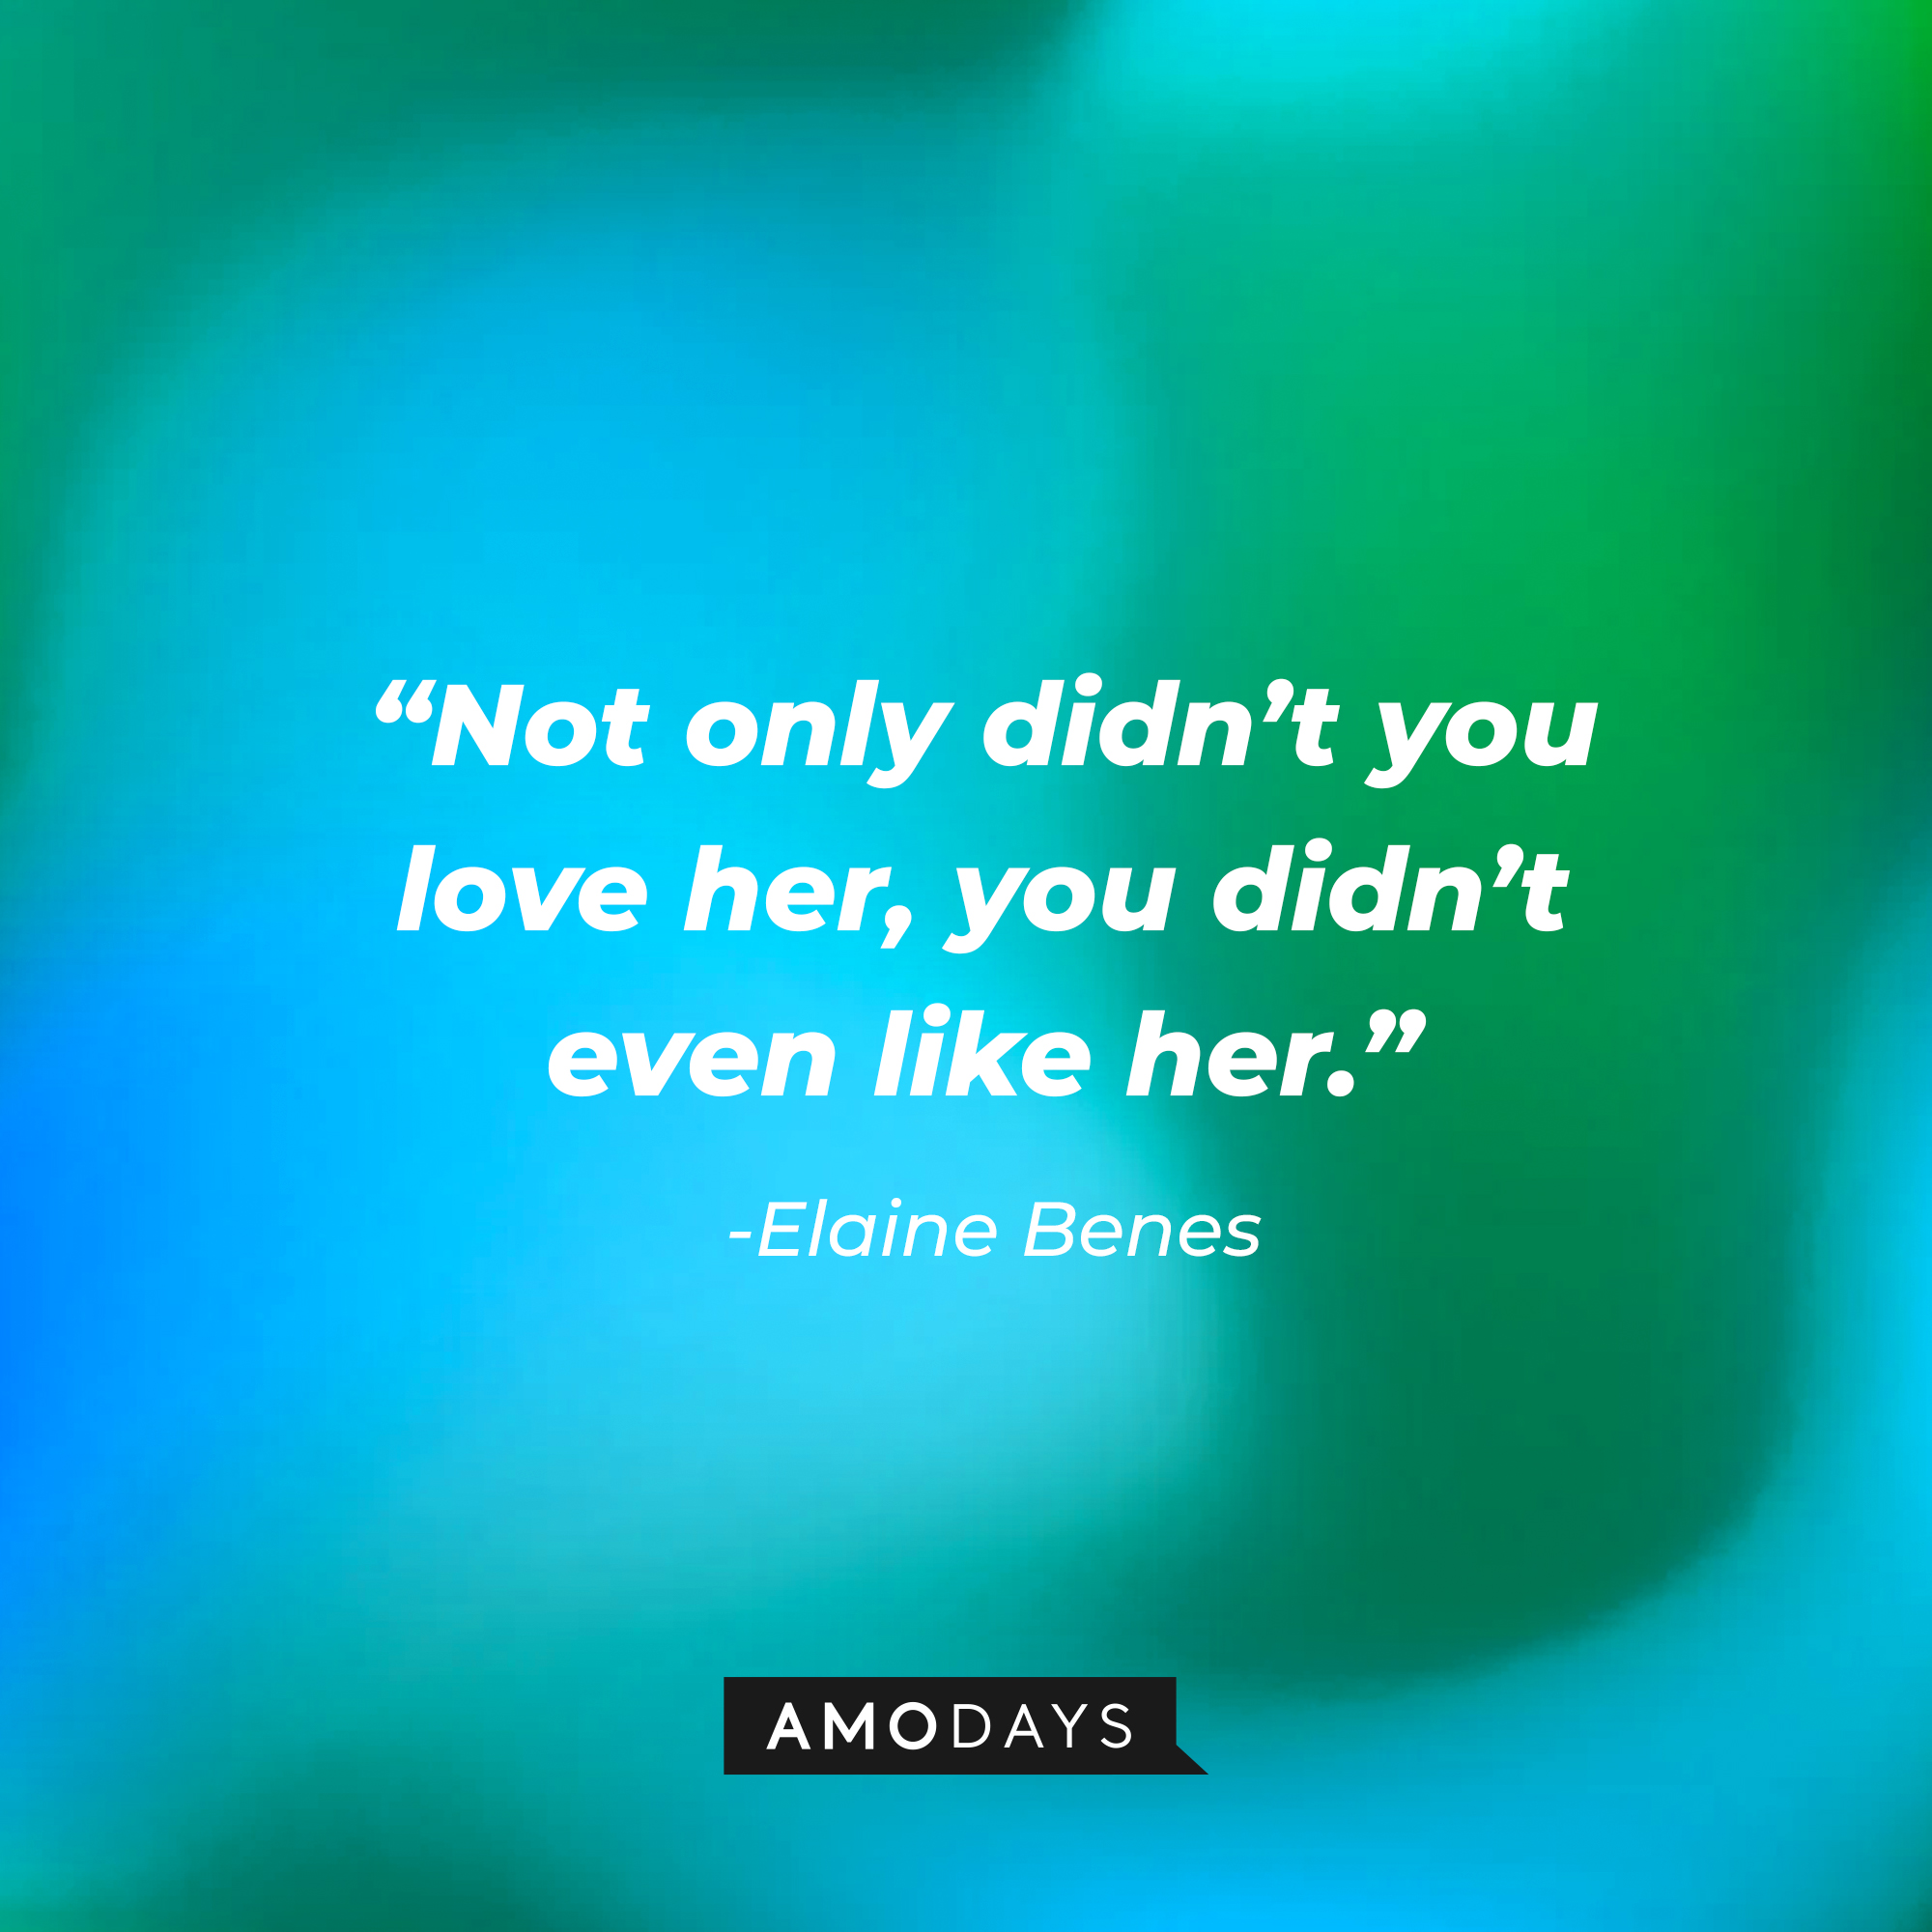 Elaine Benes’ quote: “Not only didn’t you love her, you didn’t even like her.” | Source: Amodays